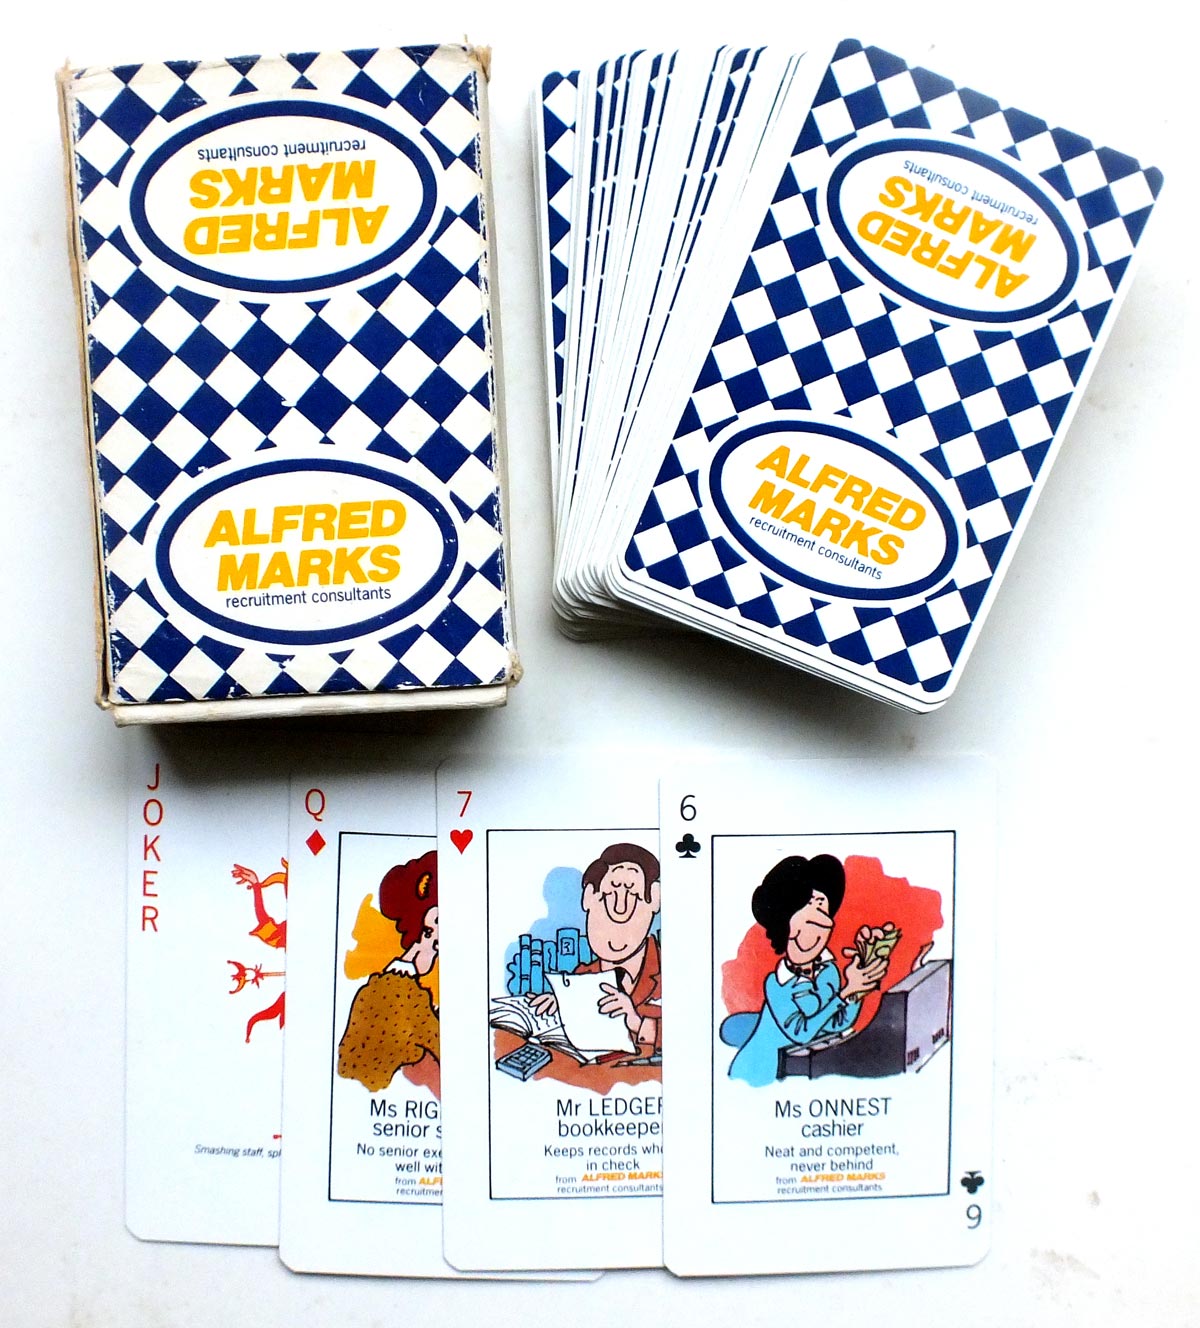 Alfred Marks Recruitment Consultants publicity playing cards, mid-1980s